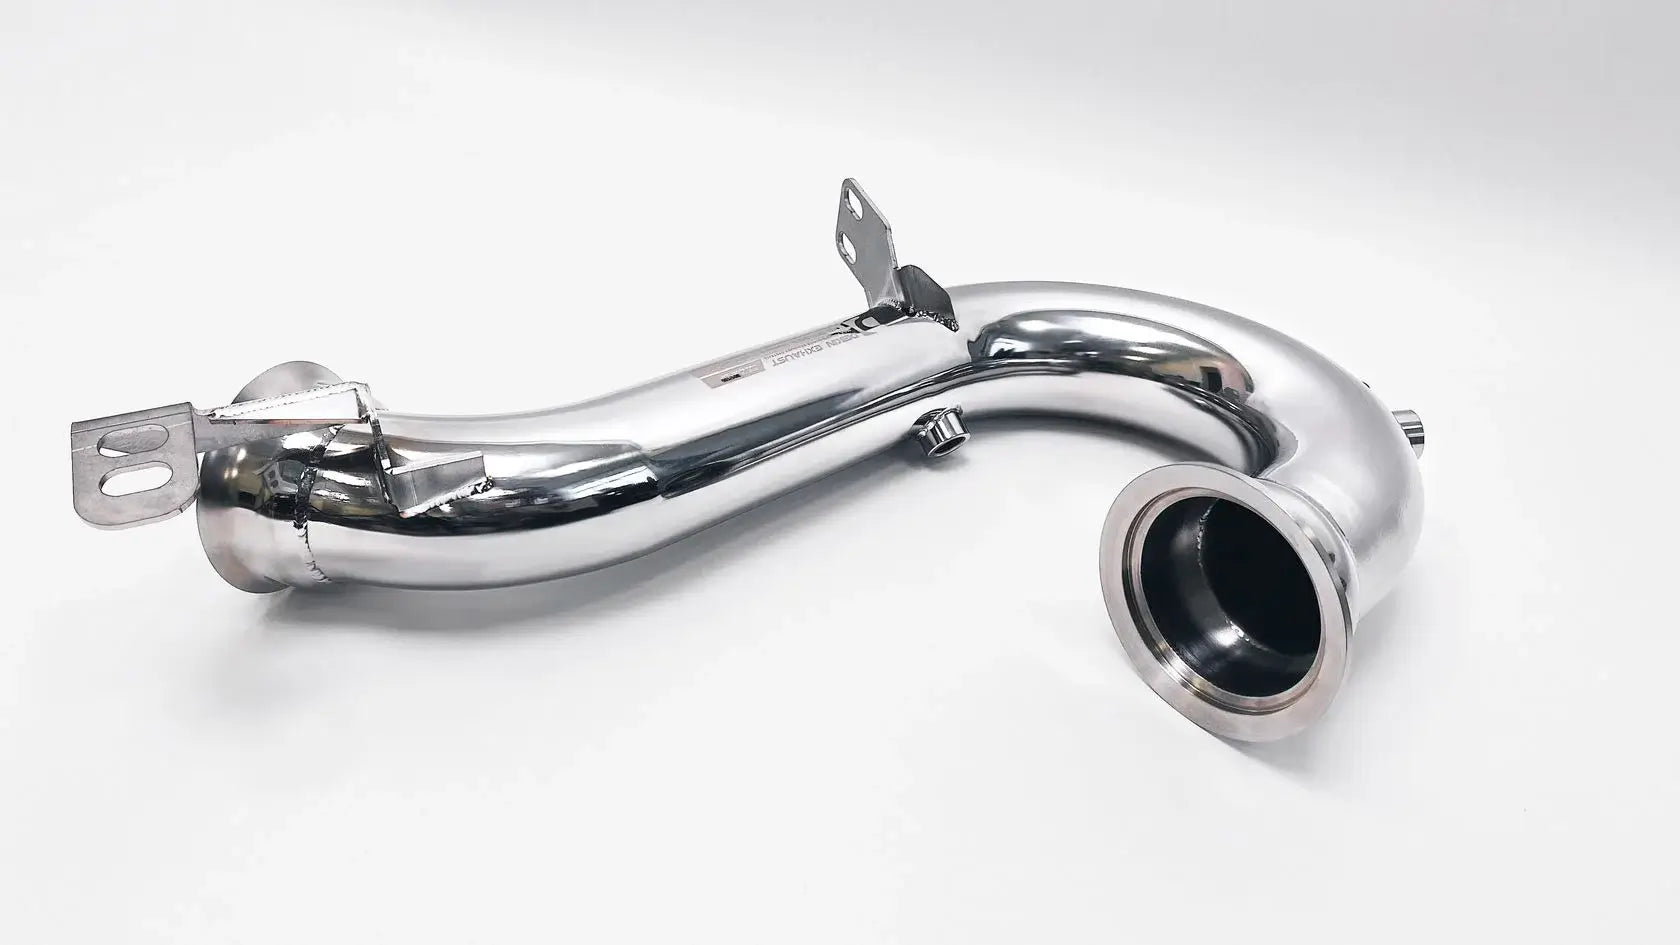 DEIKIN 10-MB.GT53.X290-DPT Downpipe for Mercedes-AMG GT53 (x290) with thermal insulation HeatShield Photo-0 